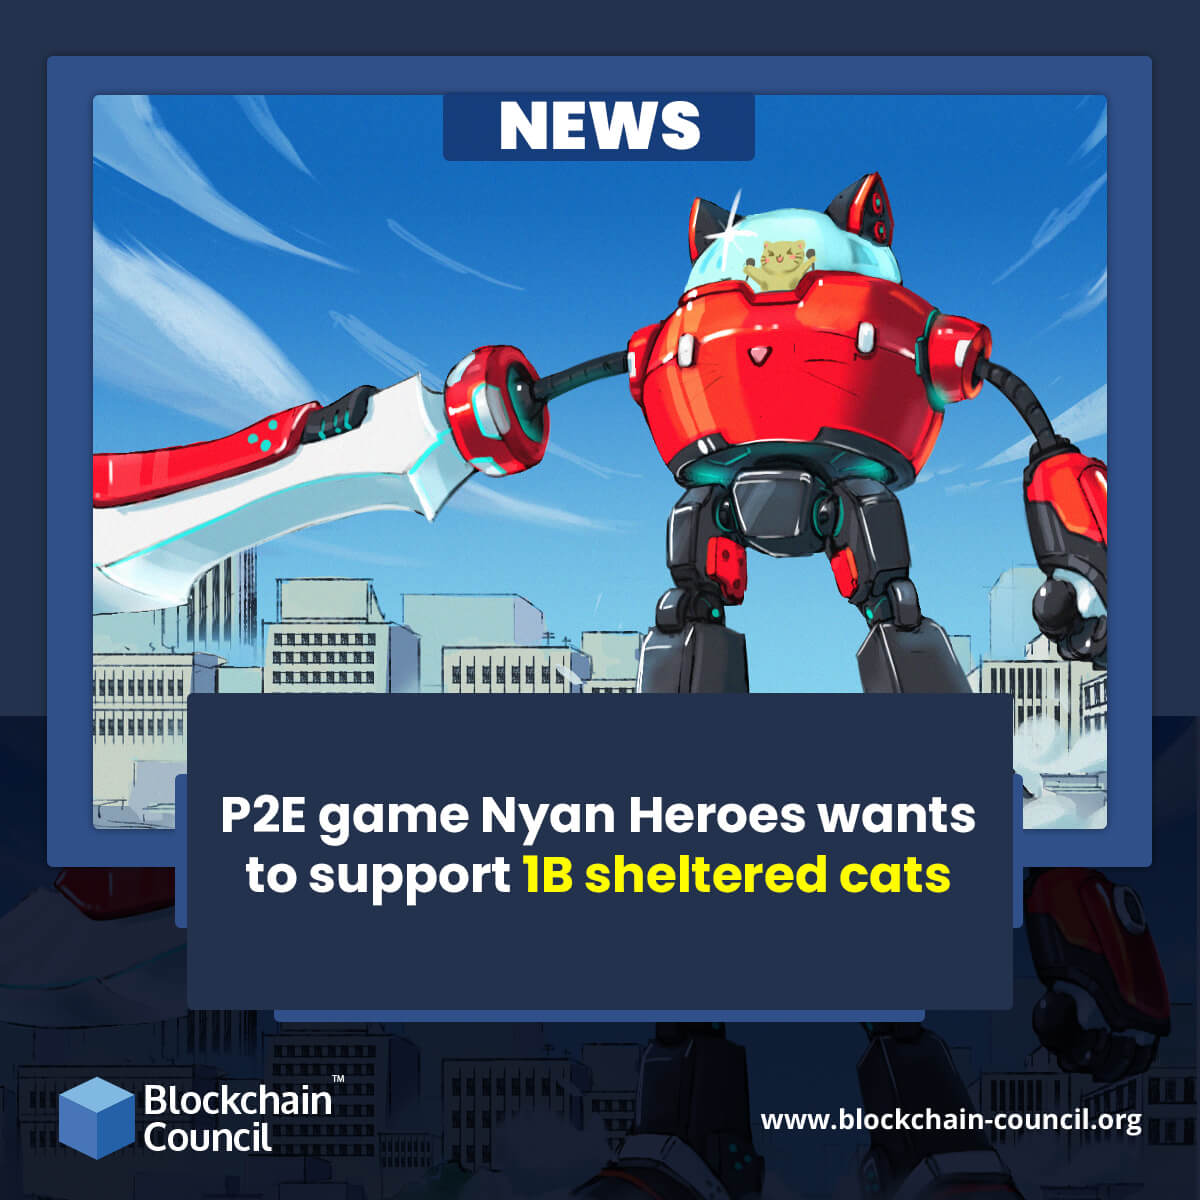 P2E game Nyan Heroes wants to support 1B sheltered cats